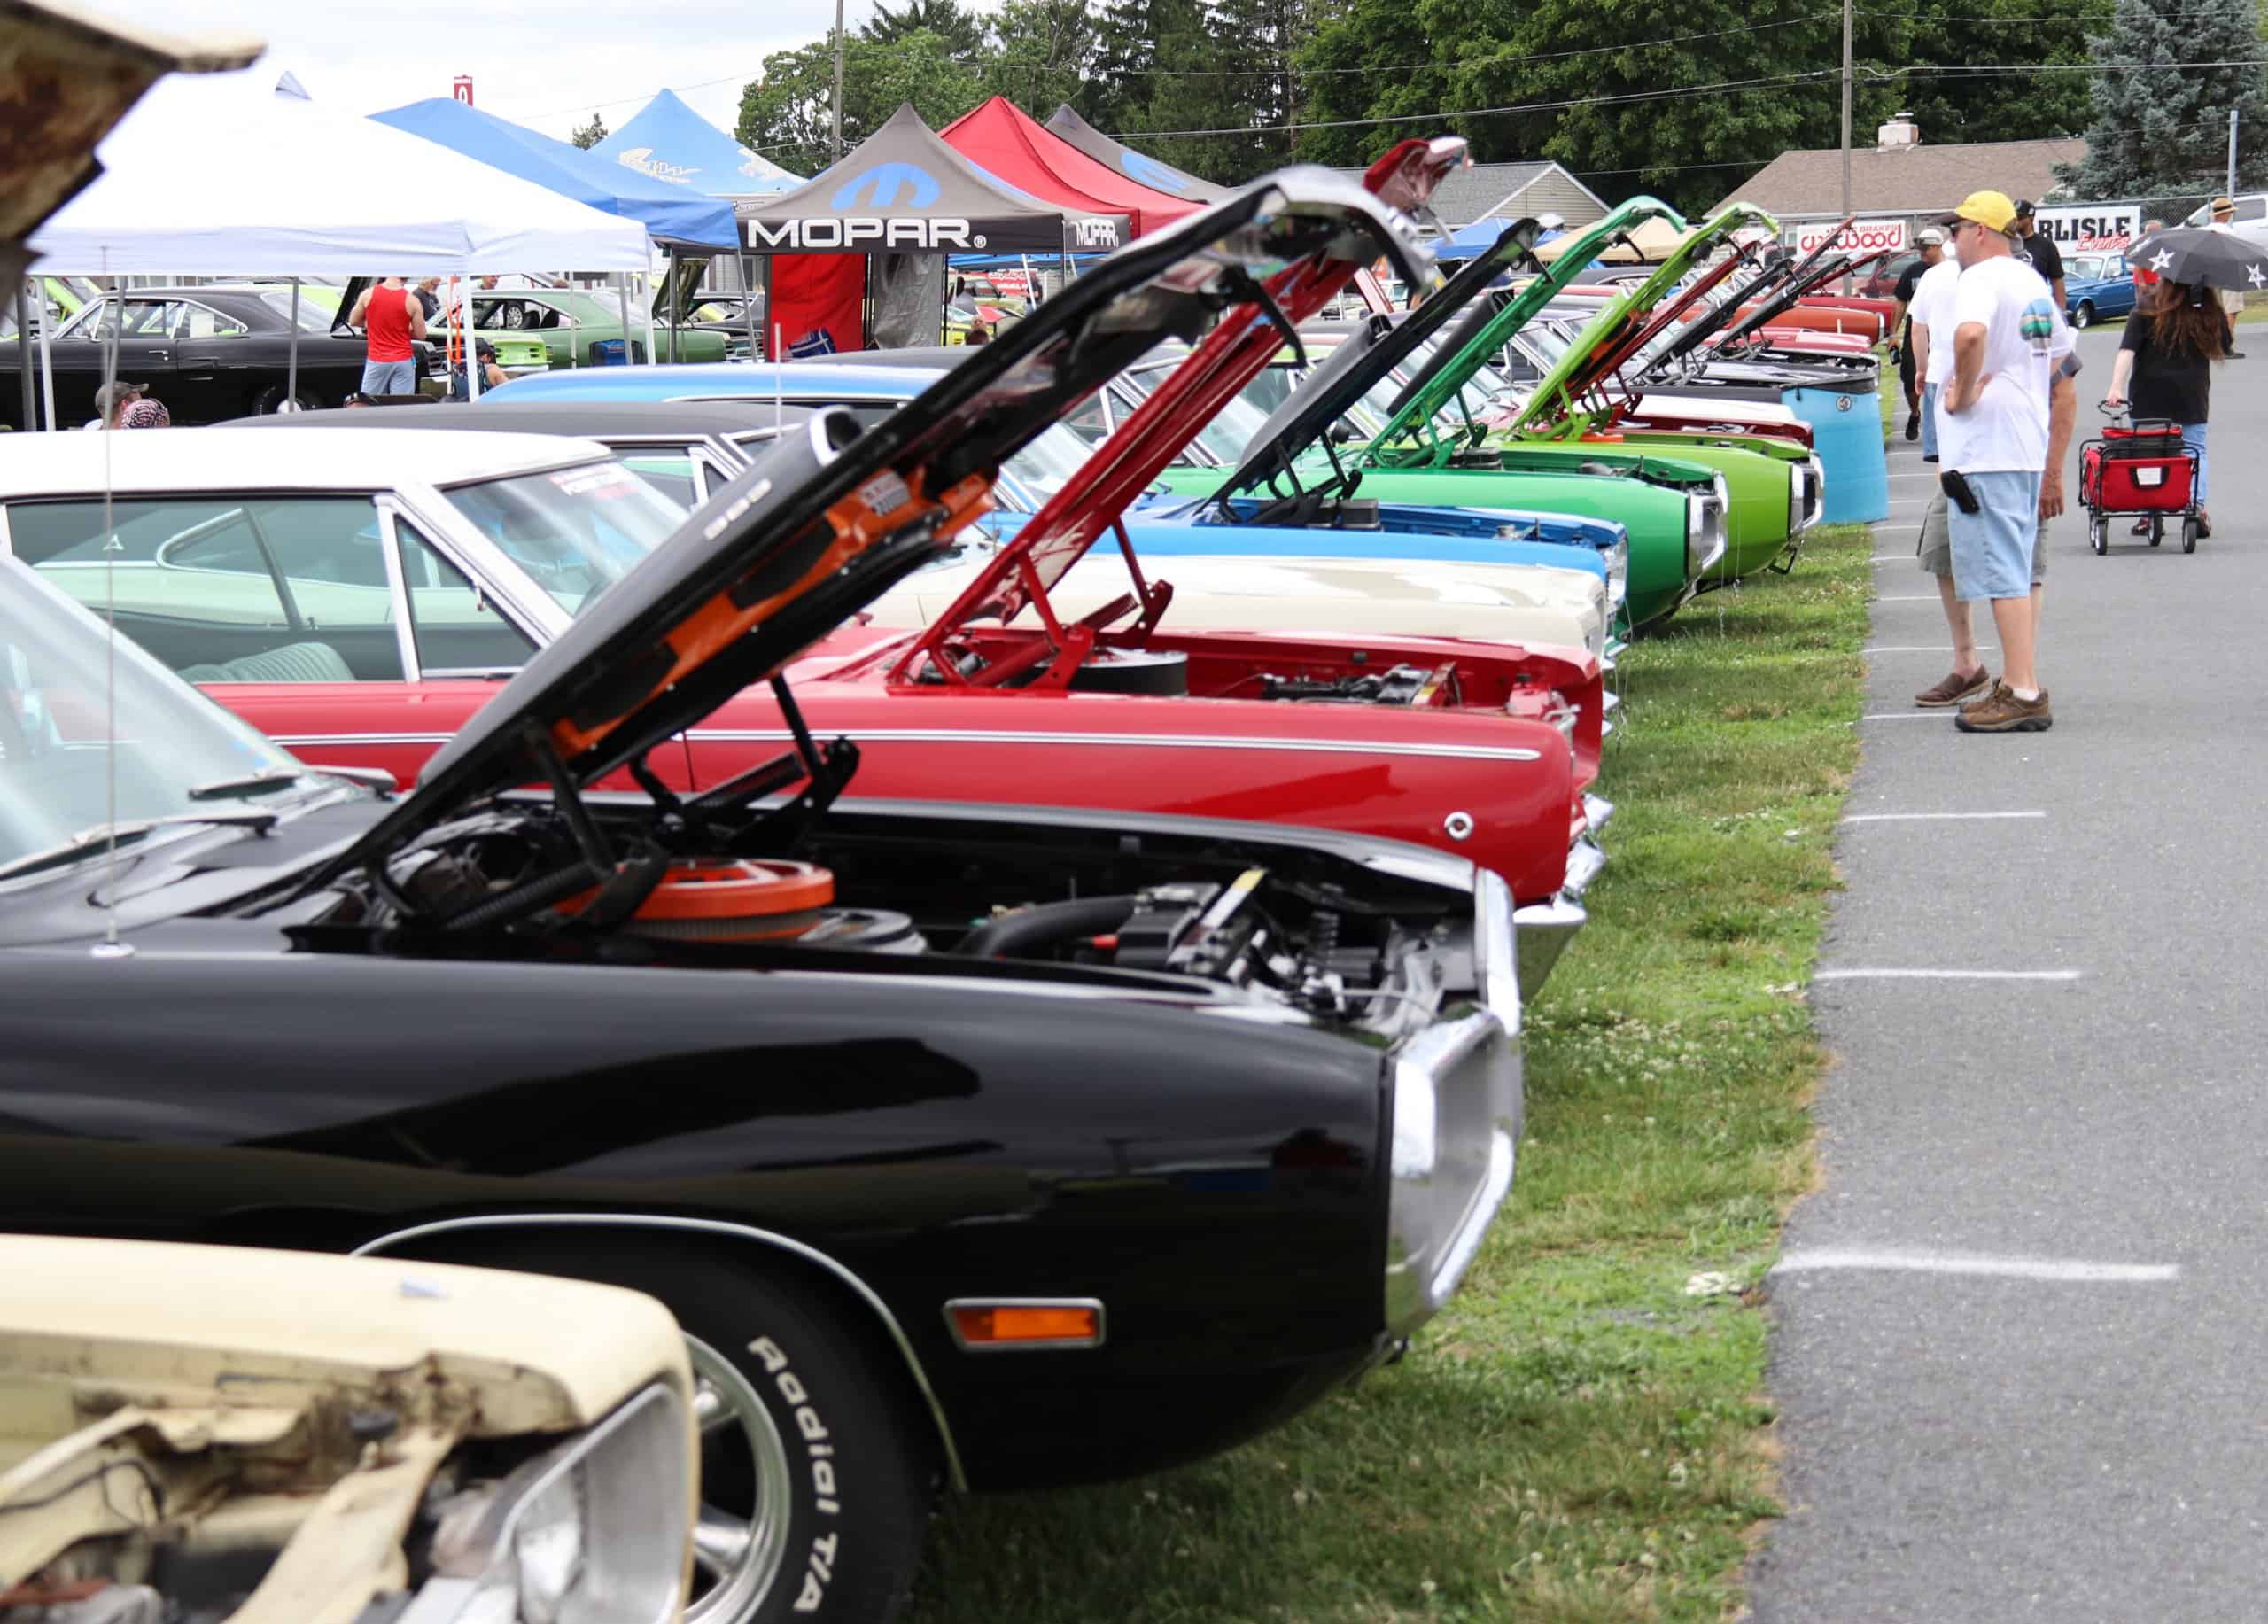 Chrysler Nationals emerges as ‘first big car event’ of 2020